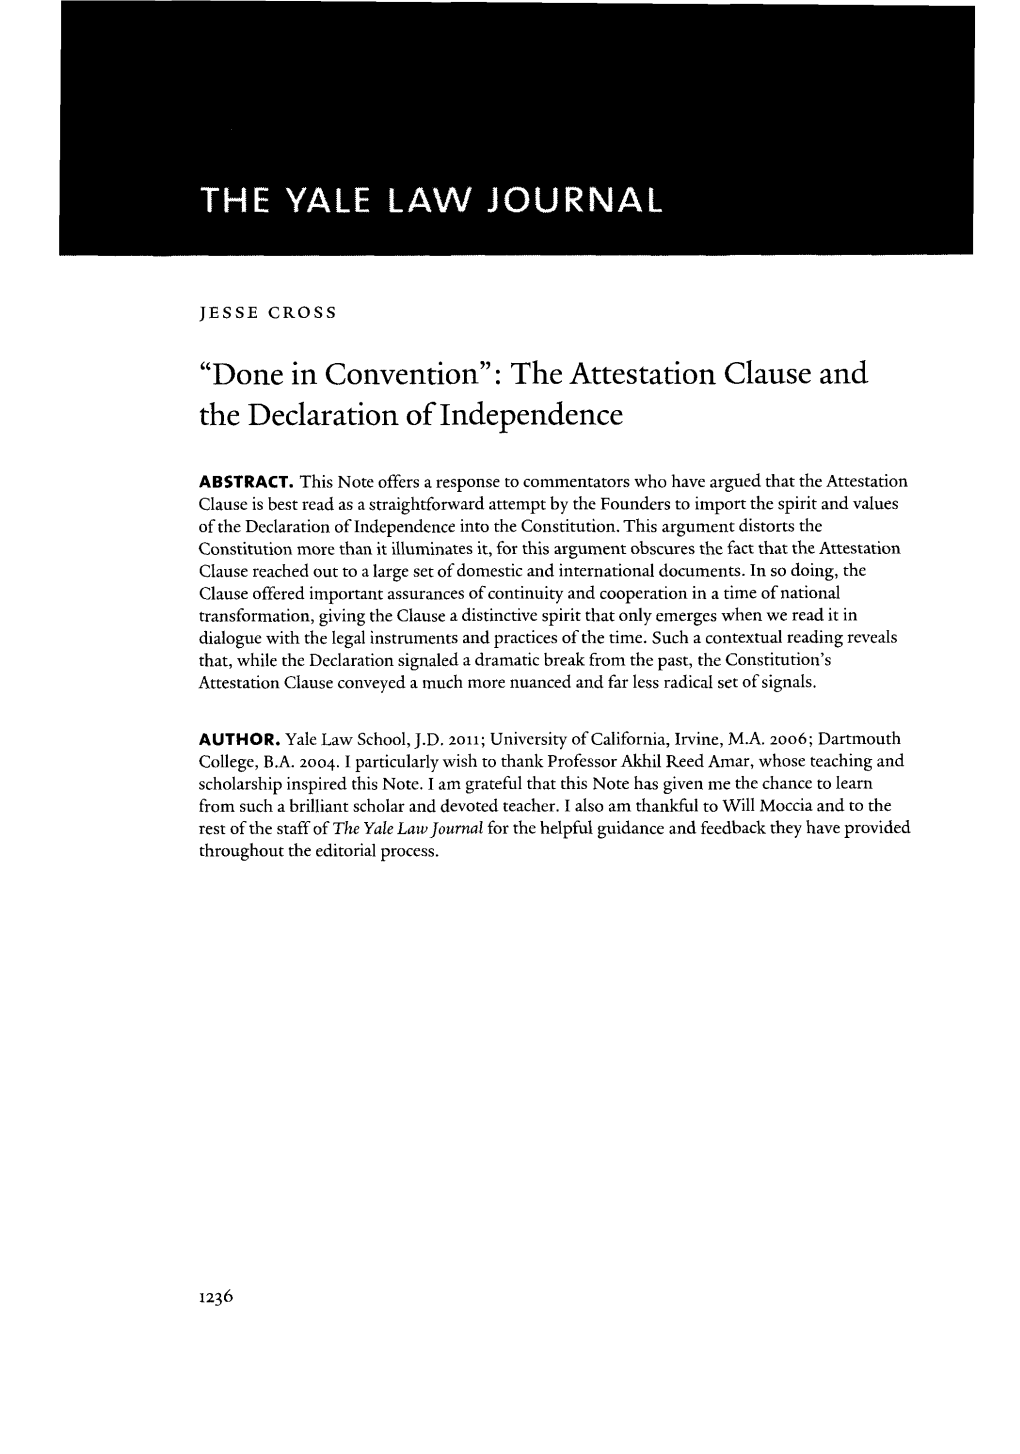 The Attestation Clause and the Declaration of Independence